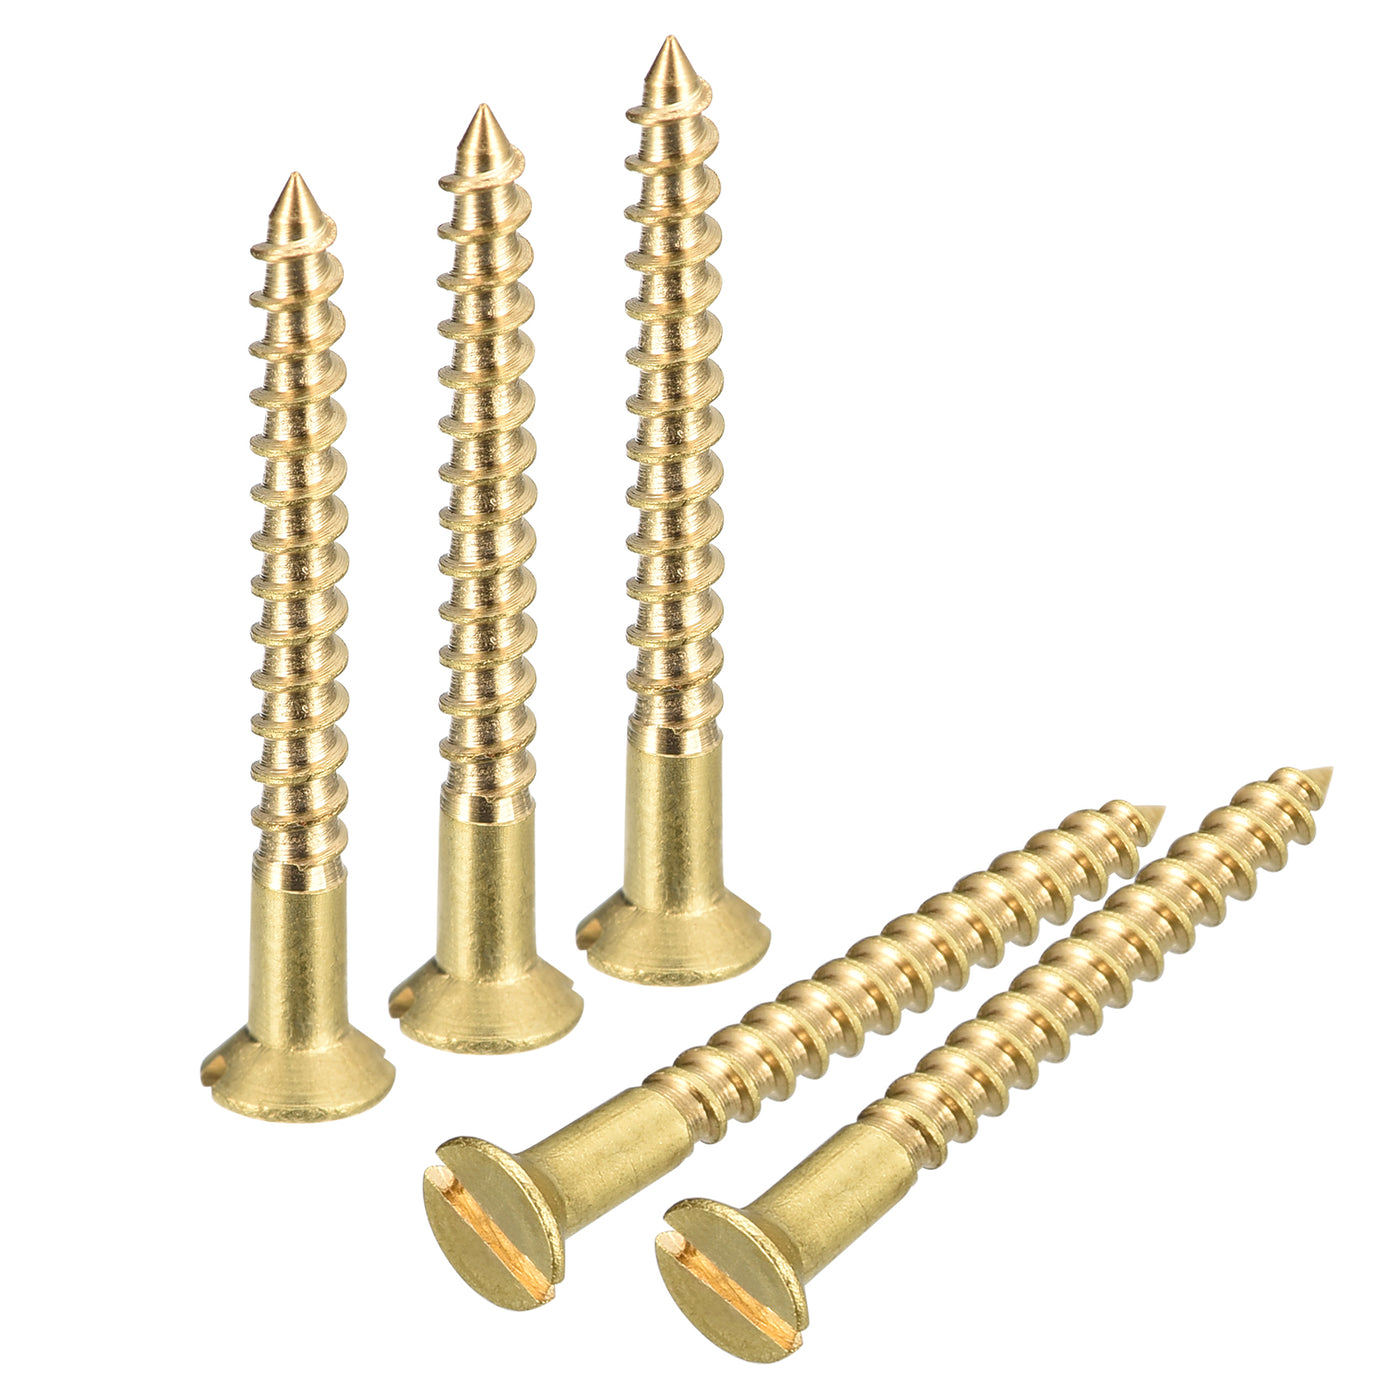 uxcell Uxcell 50Pcs M2.5 x 25mm Brass Slotted Drive Flat Head Wood Screws Self Tapping Screw